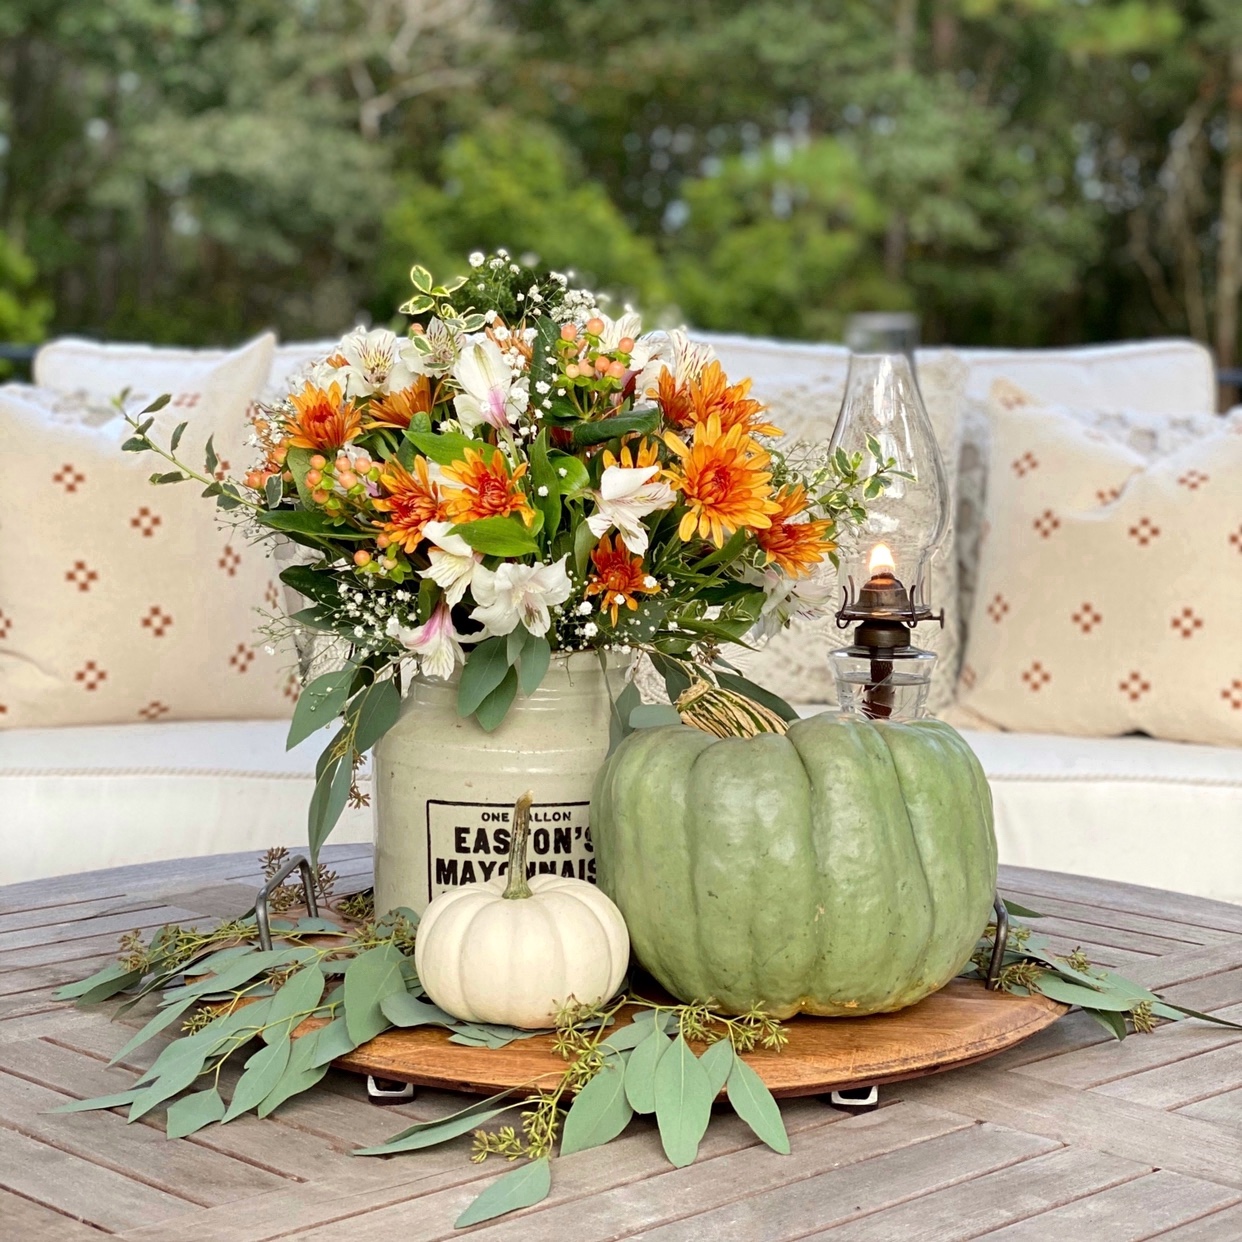 Fall centerpiece on the back patio with a crock filled with Fall flowers, pumpkins, and a vintage glass lantern glowing.